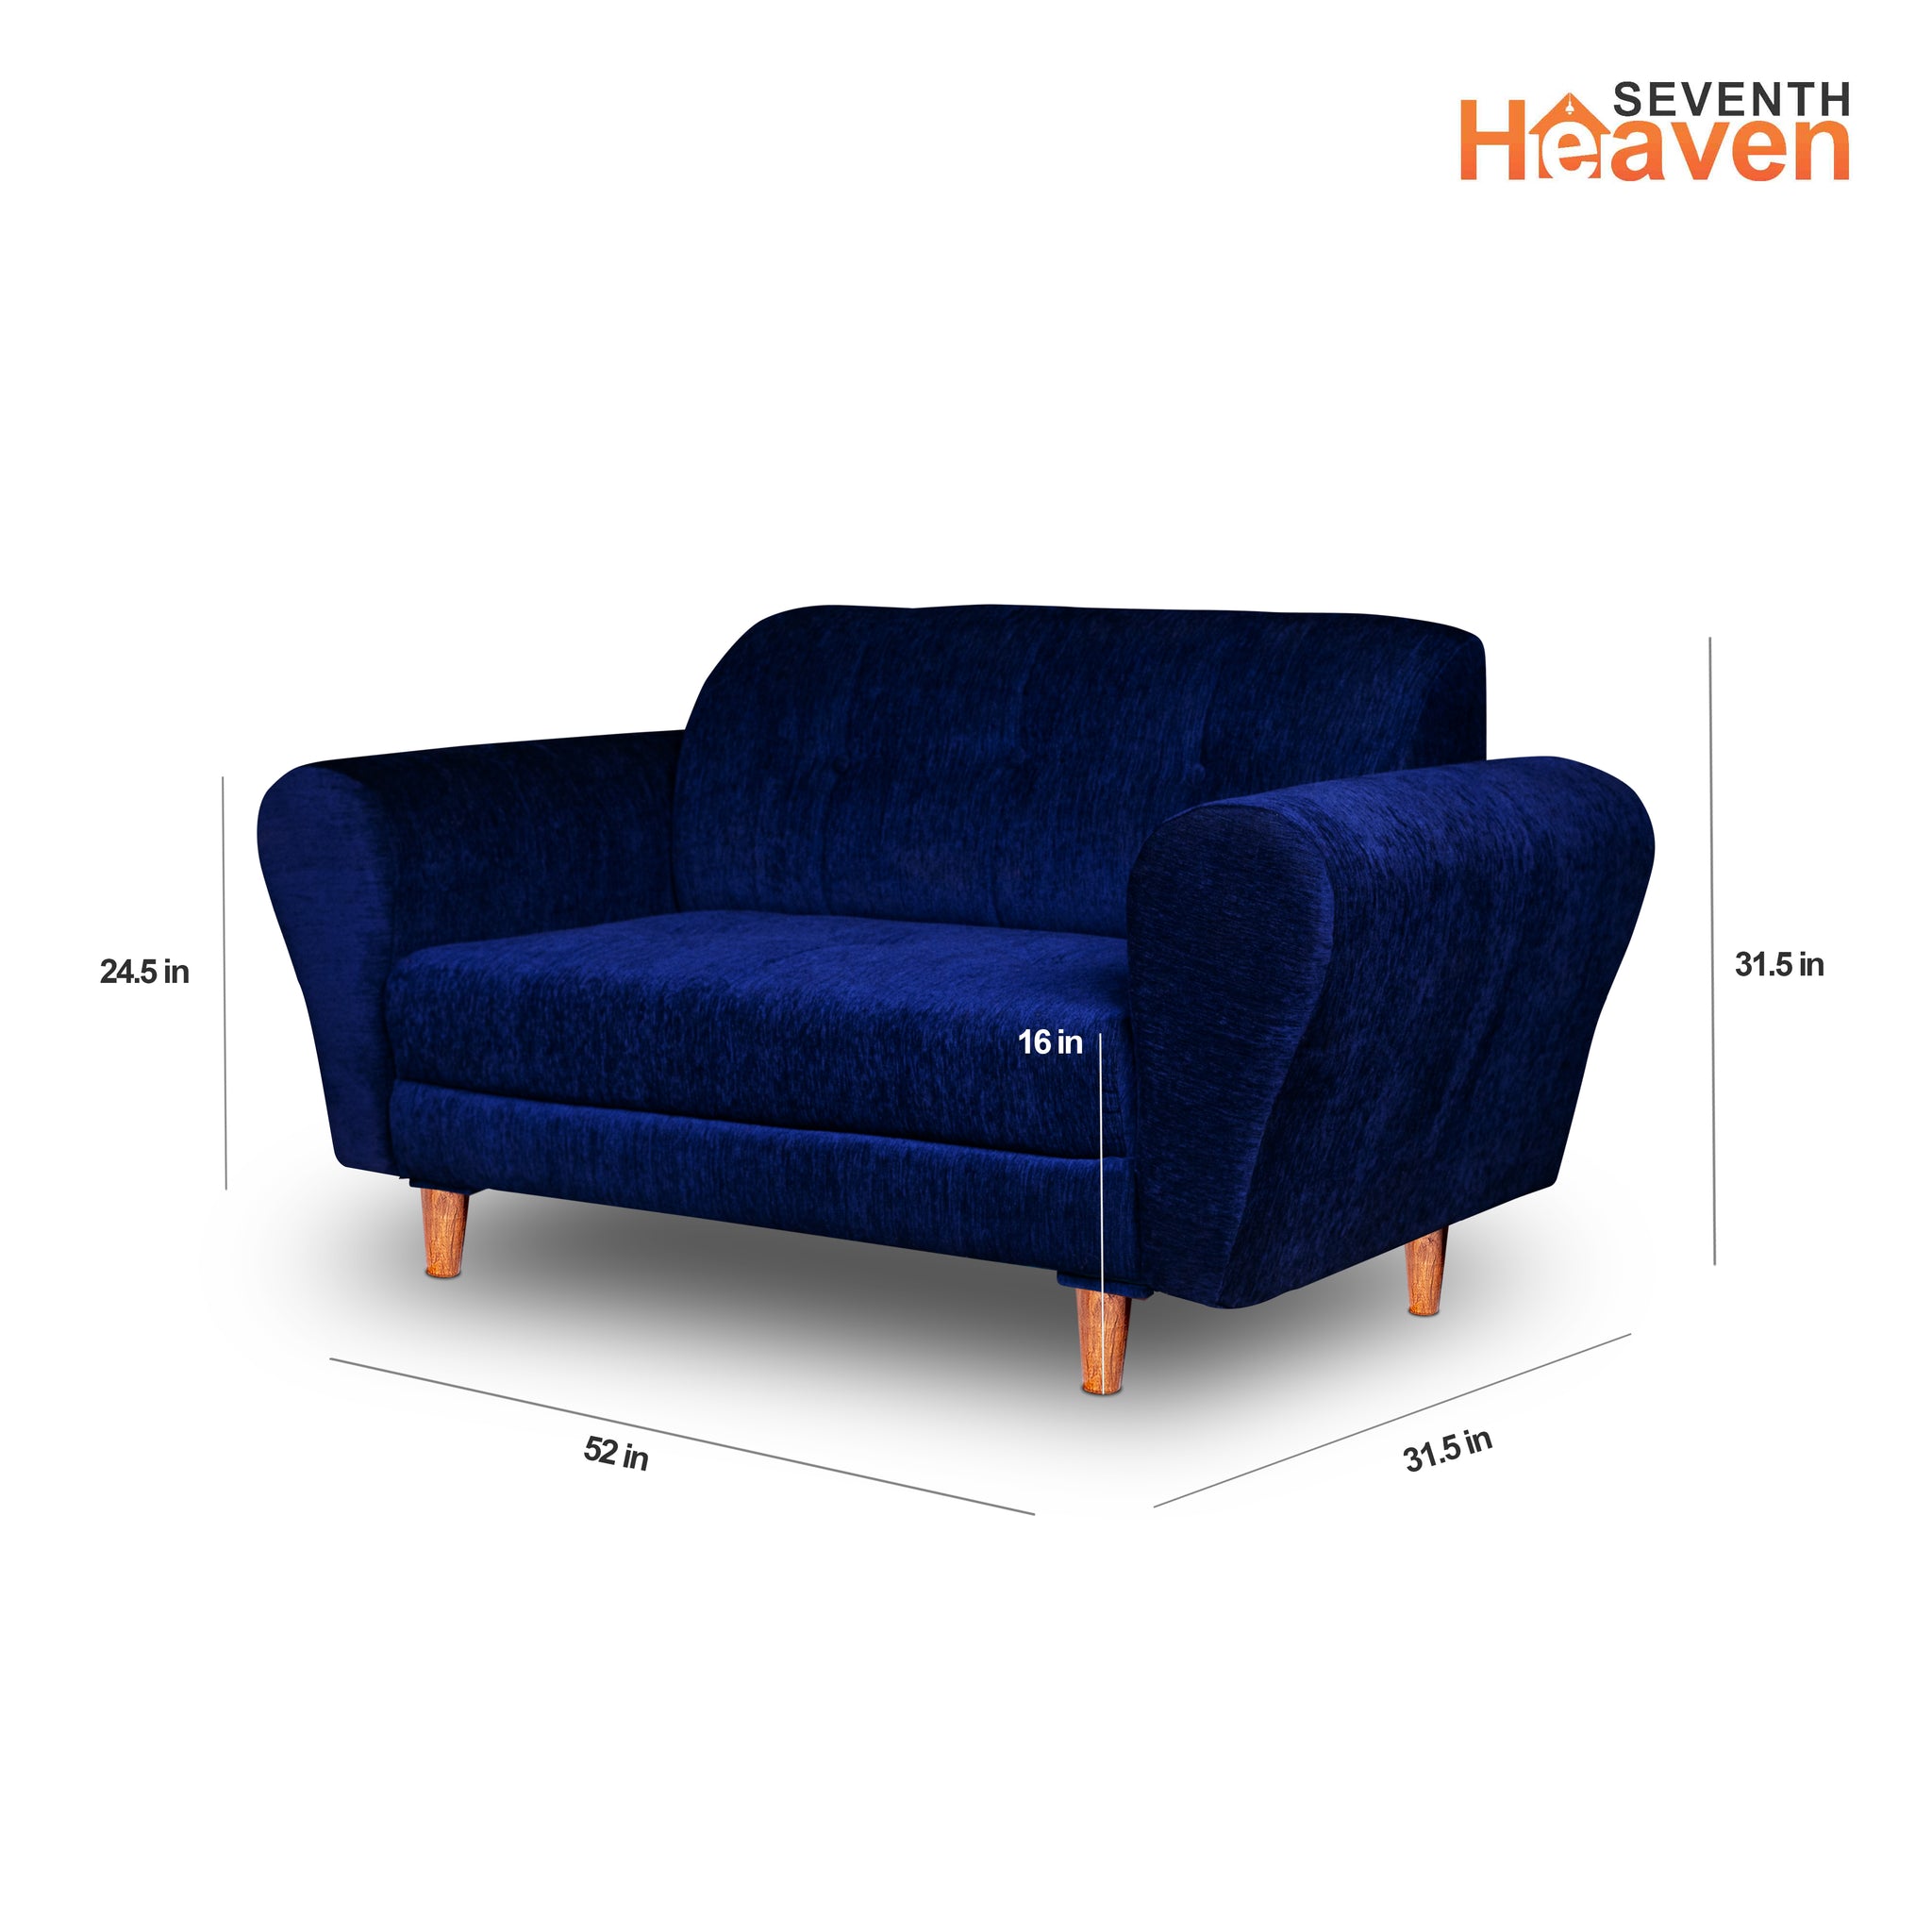 Seventh Heaven Milan 2 Seater Wooden Sofa Set Modern & Elegant Smart Furniture Range for luxurious homes, living rooms and offices. Blue Colour Molphino fabric with sheesham polished wooden legs. Product dimensions are also mentioned.